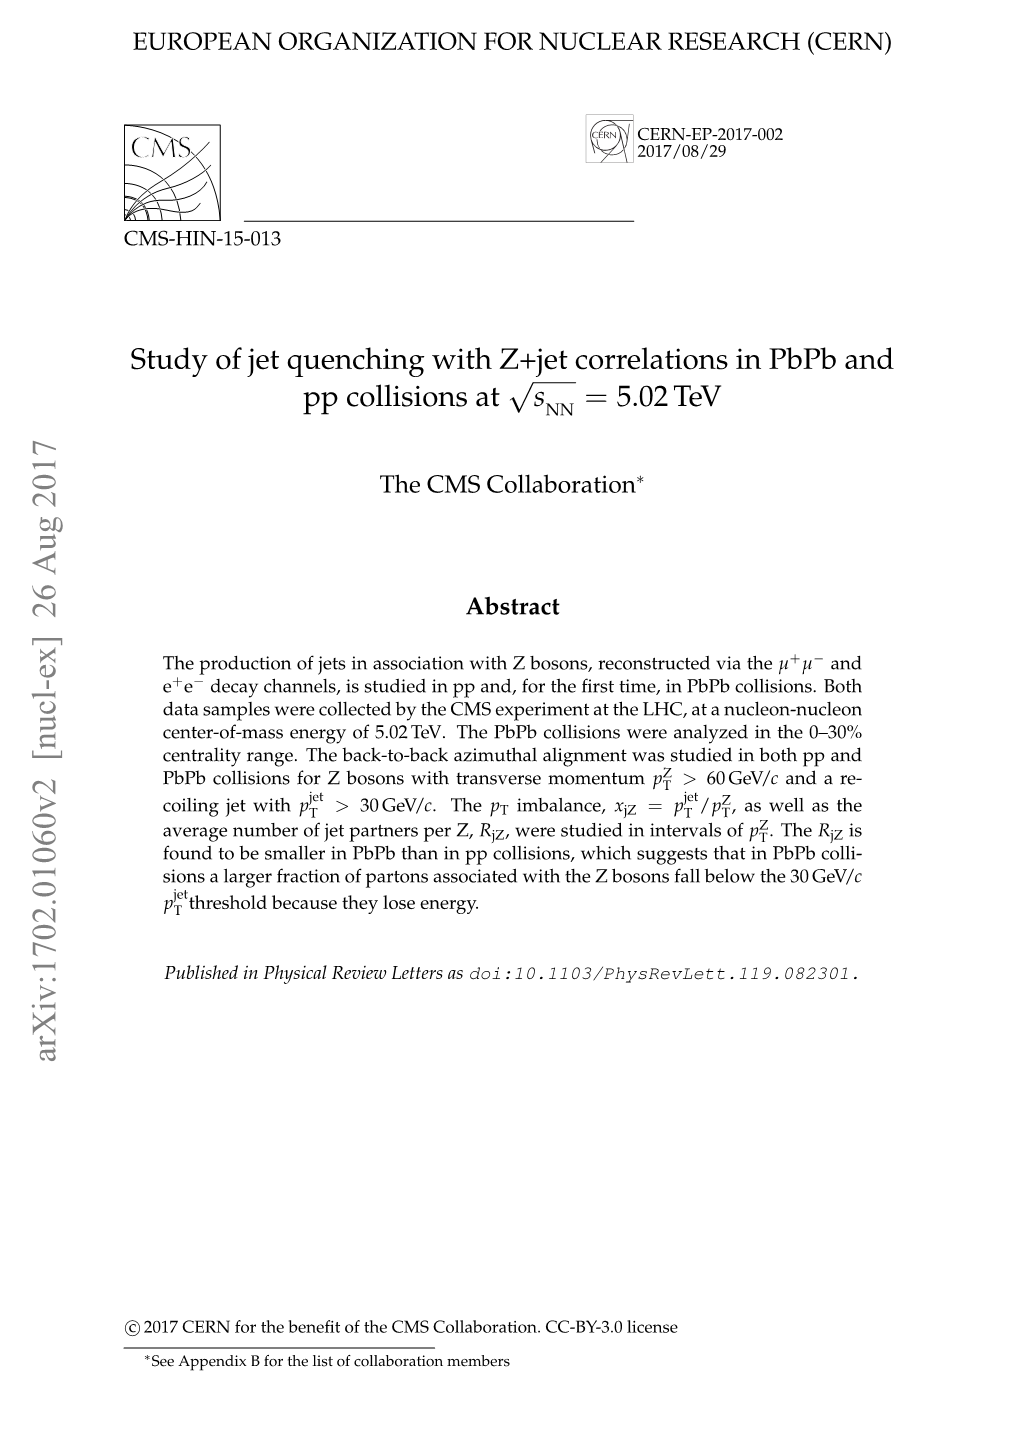 Study of Jet Quenching with Z+Jet Correlations in Pbpb and Pp